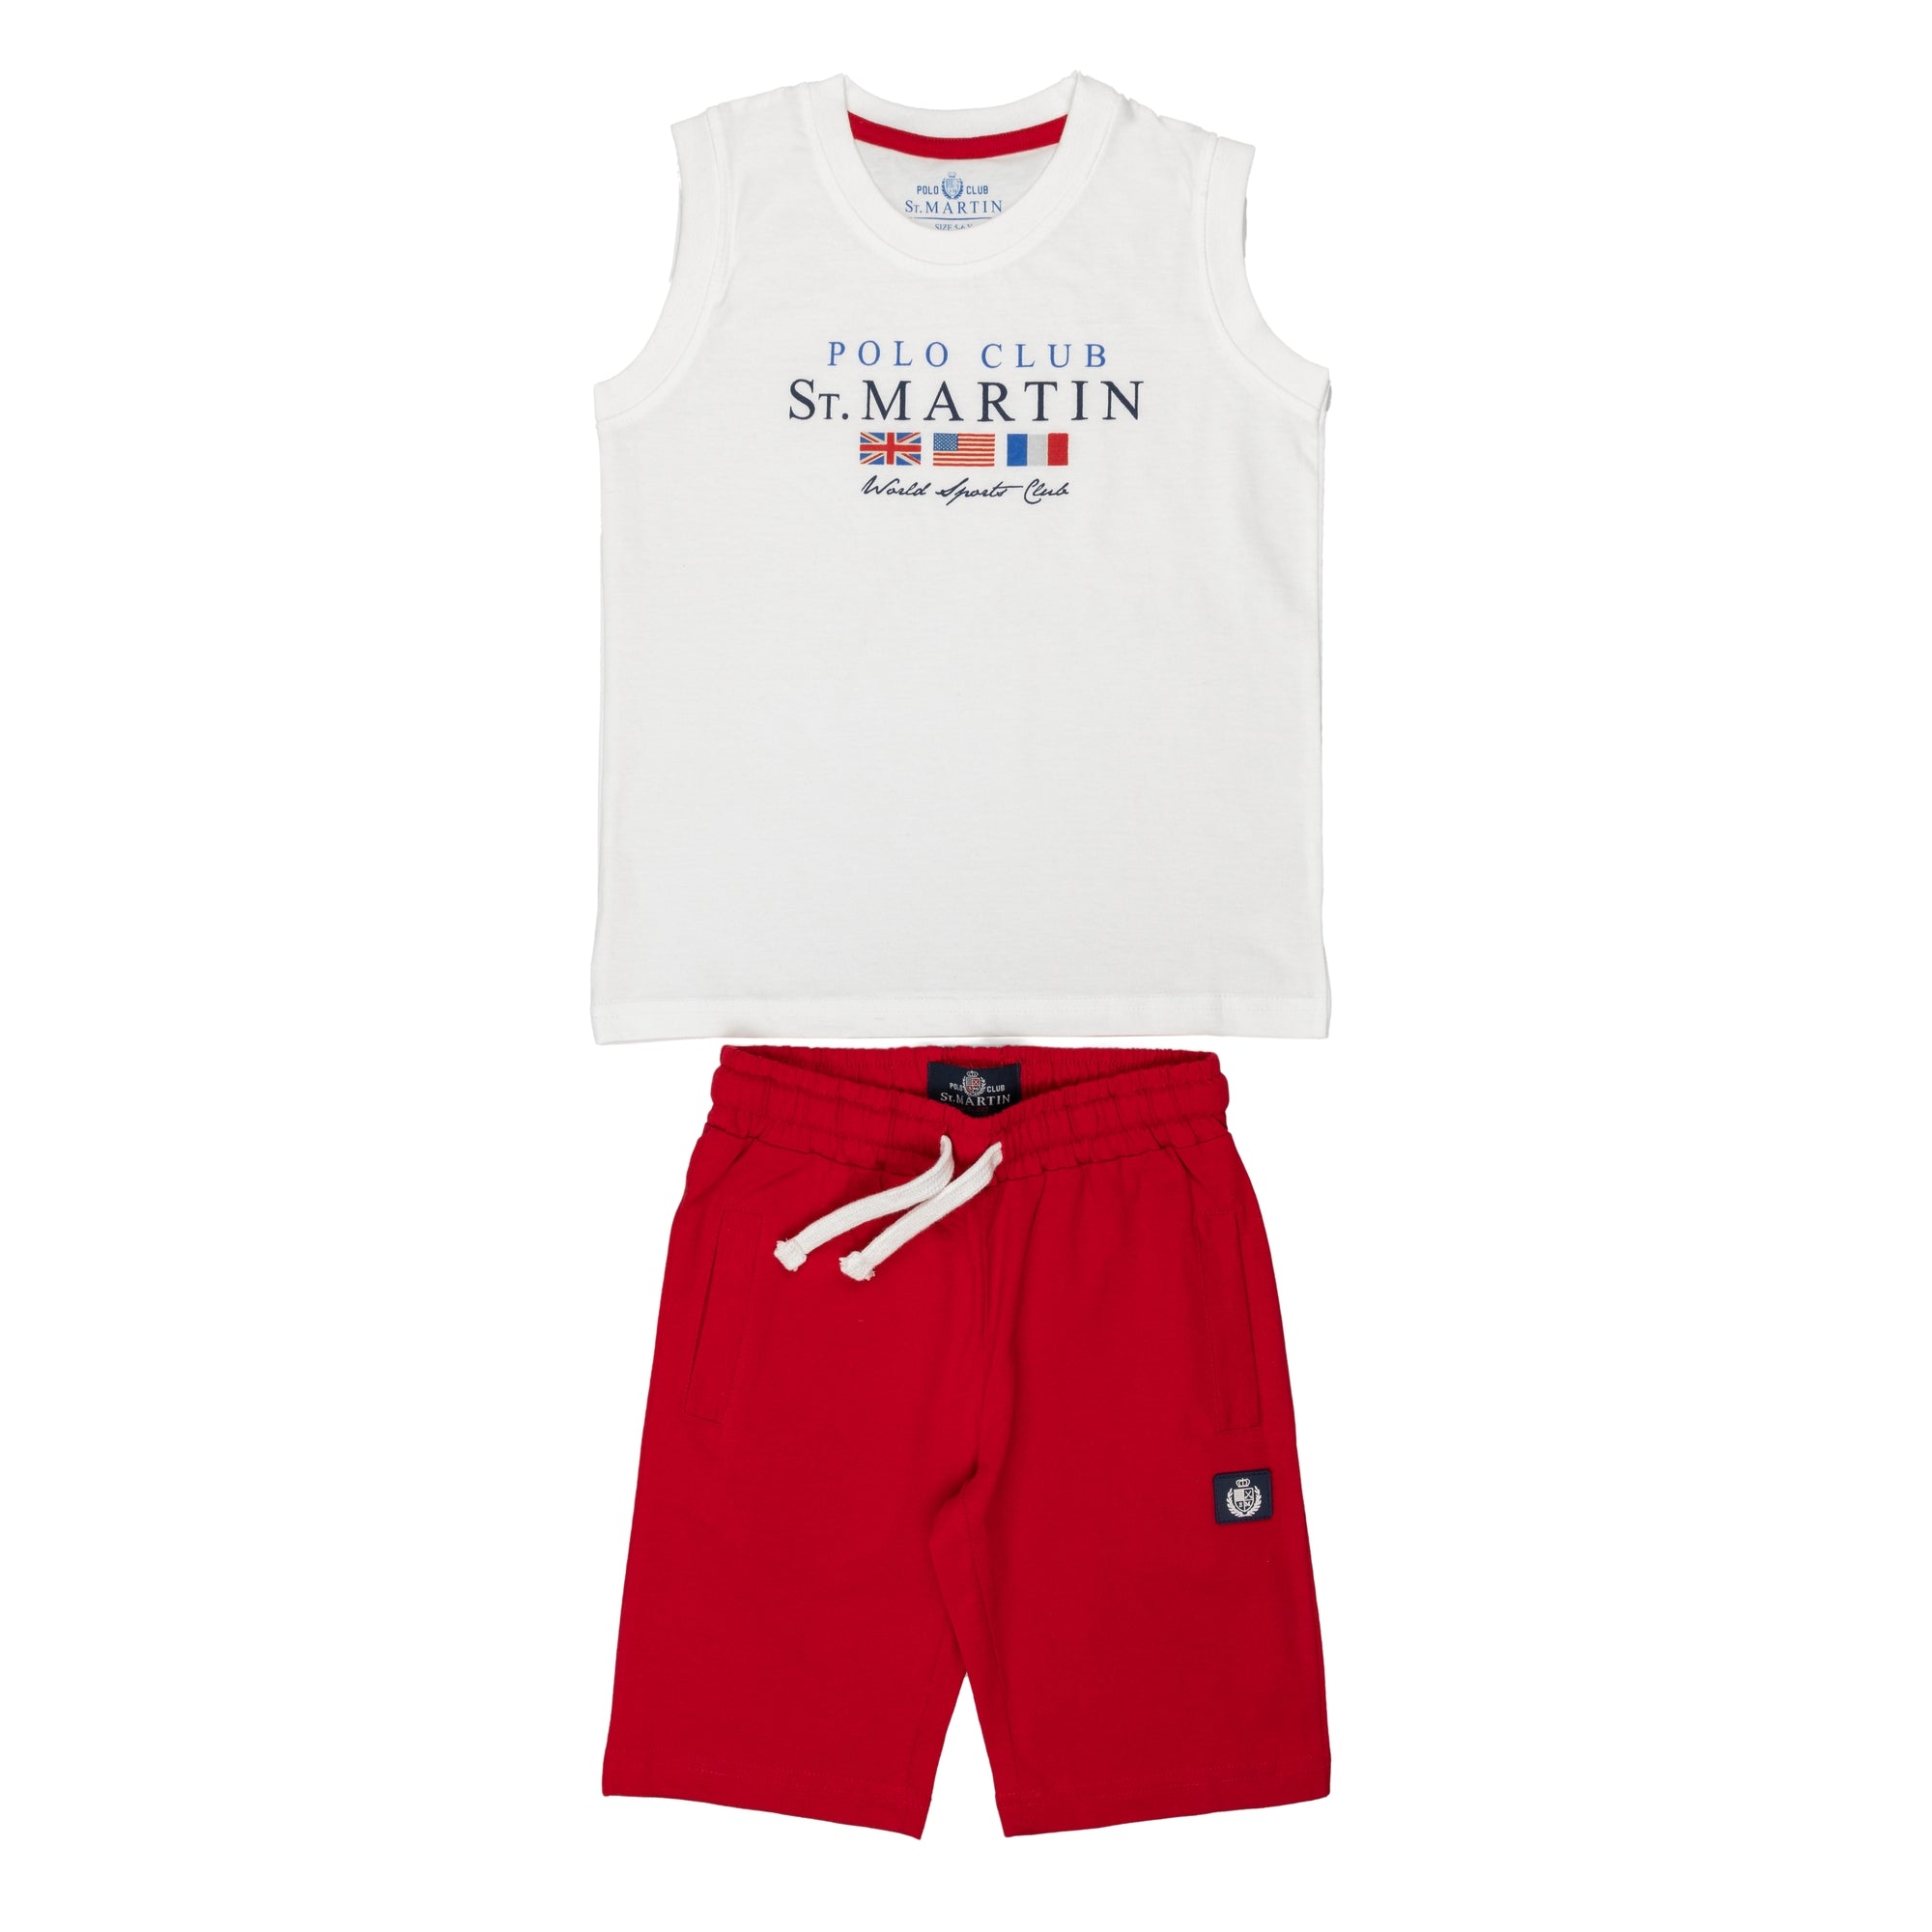 Jersey tank top and shorts set with flags logo print